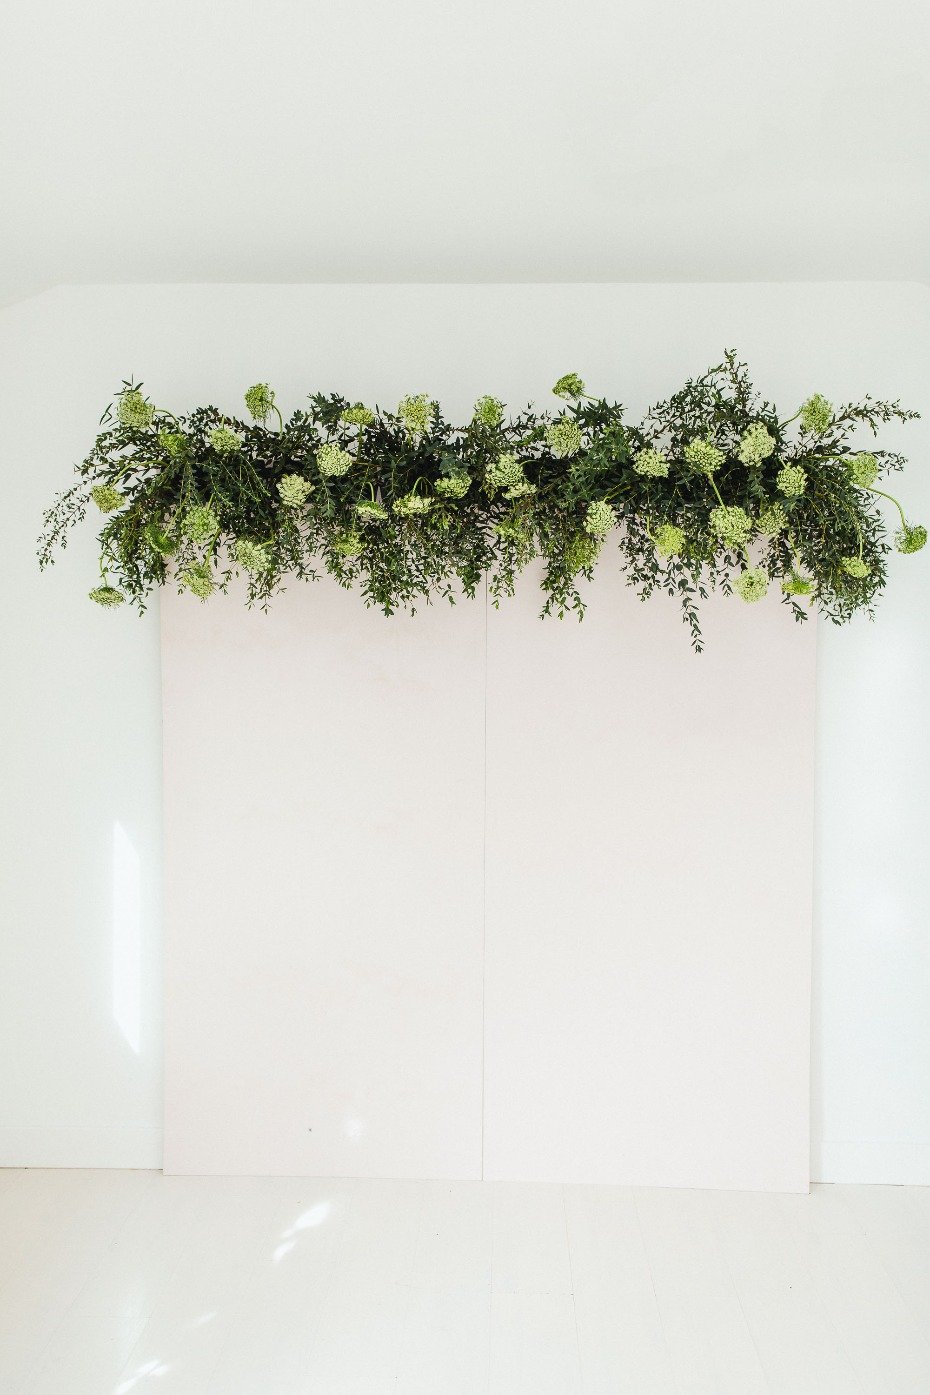 How to make a floral backdrop wall